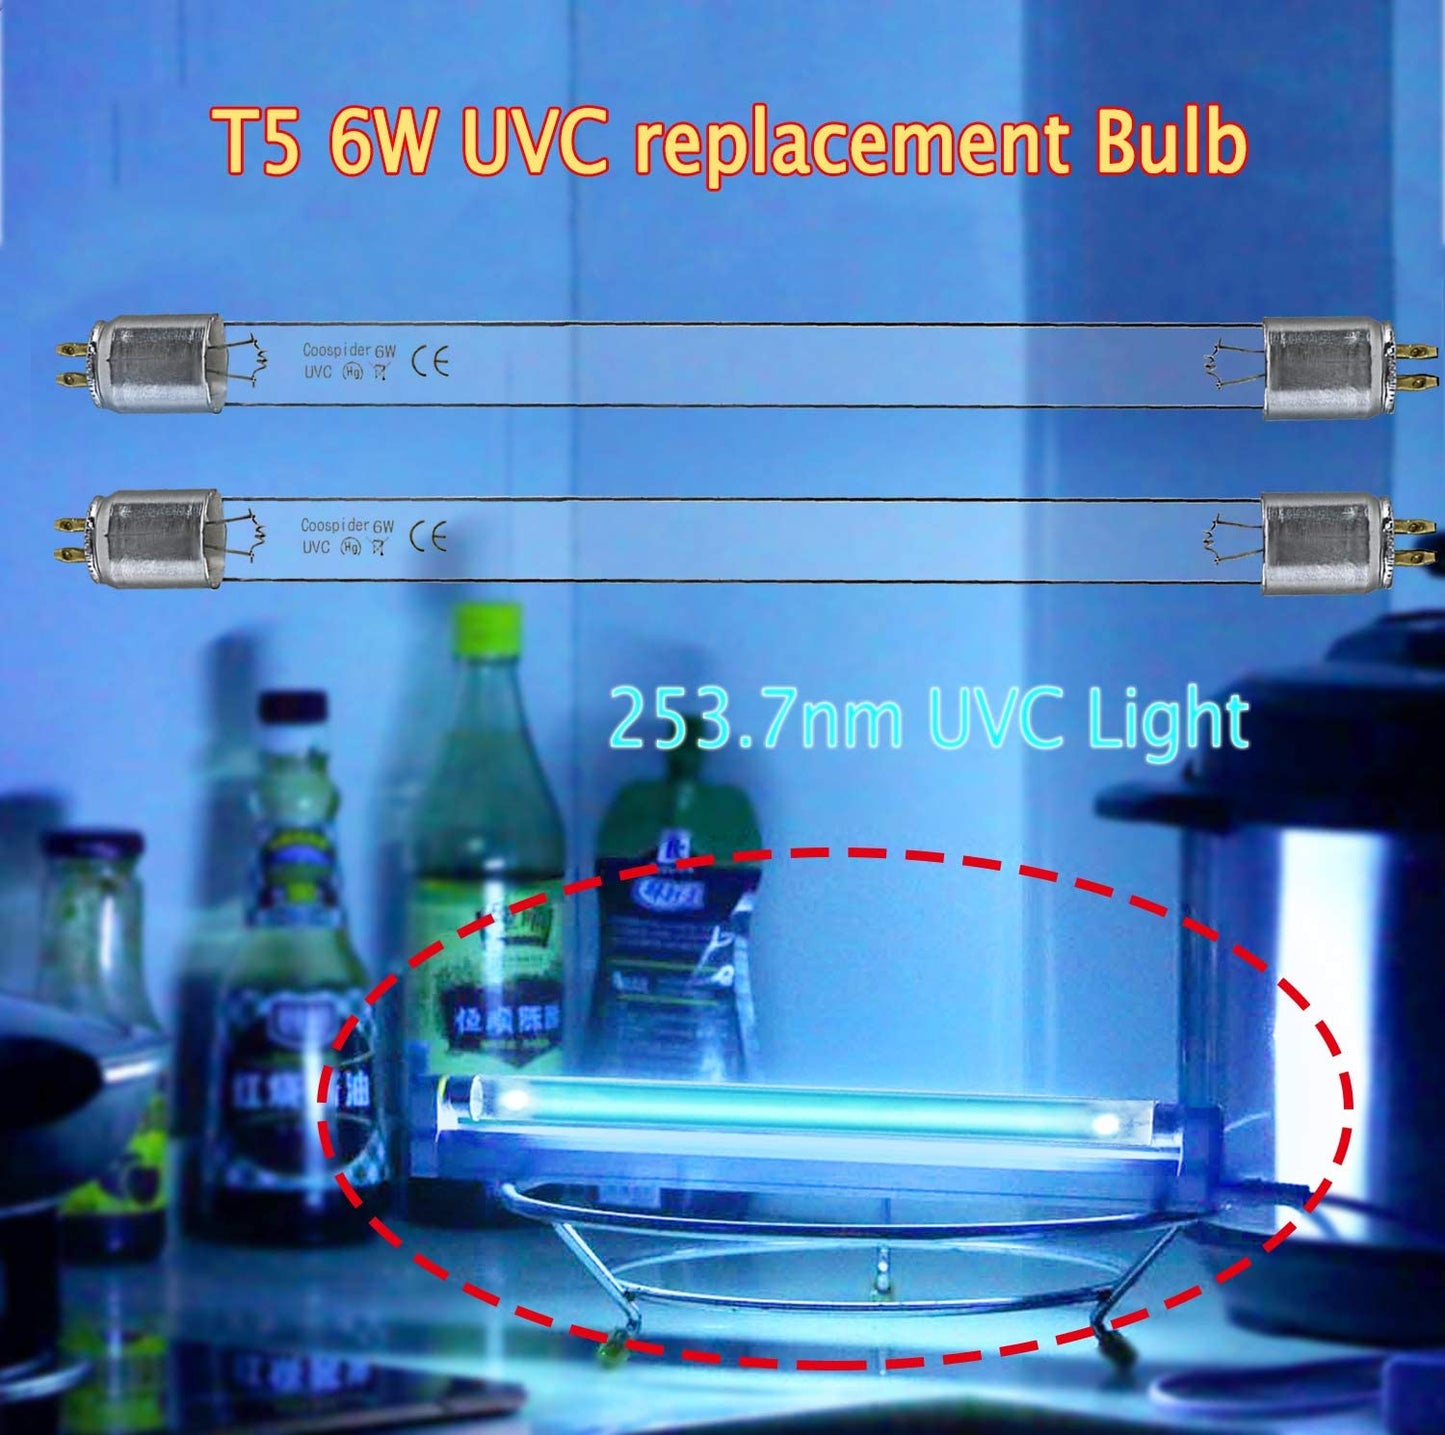 4-Pack*T5 6W UV Bulb Replacement Light Straight Tube  (253.7nm Ozone-free)